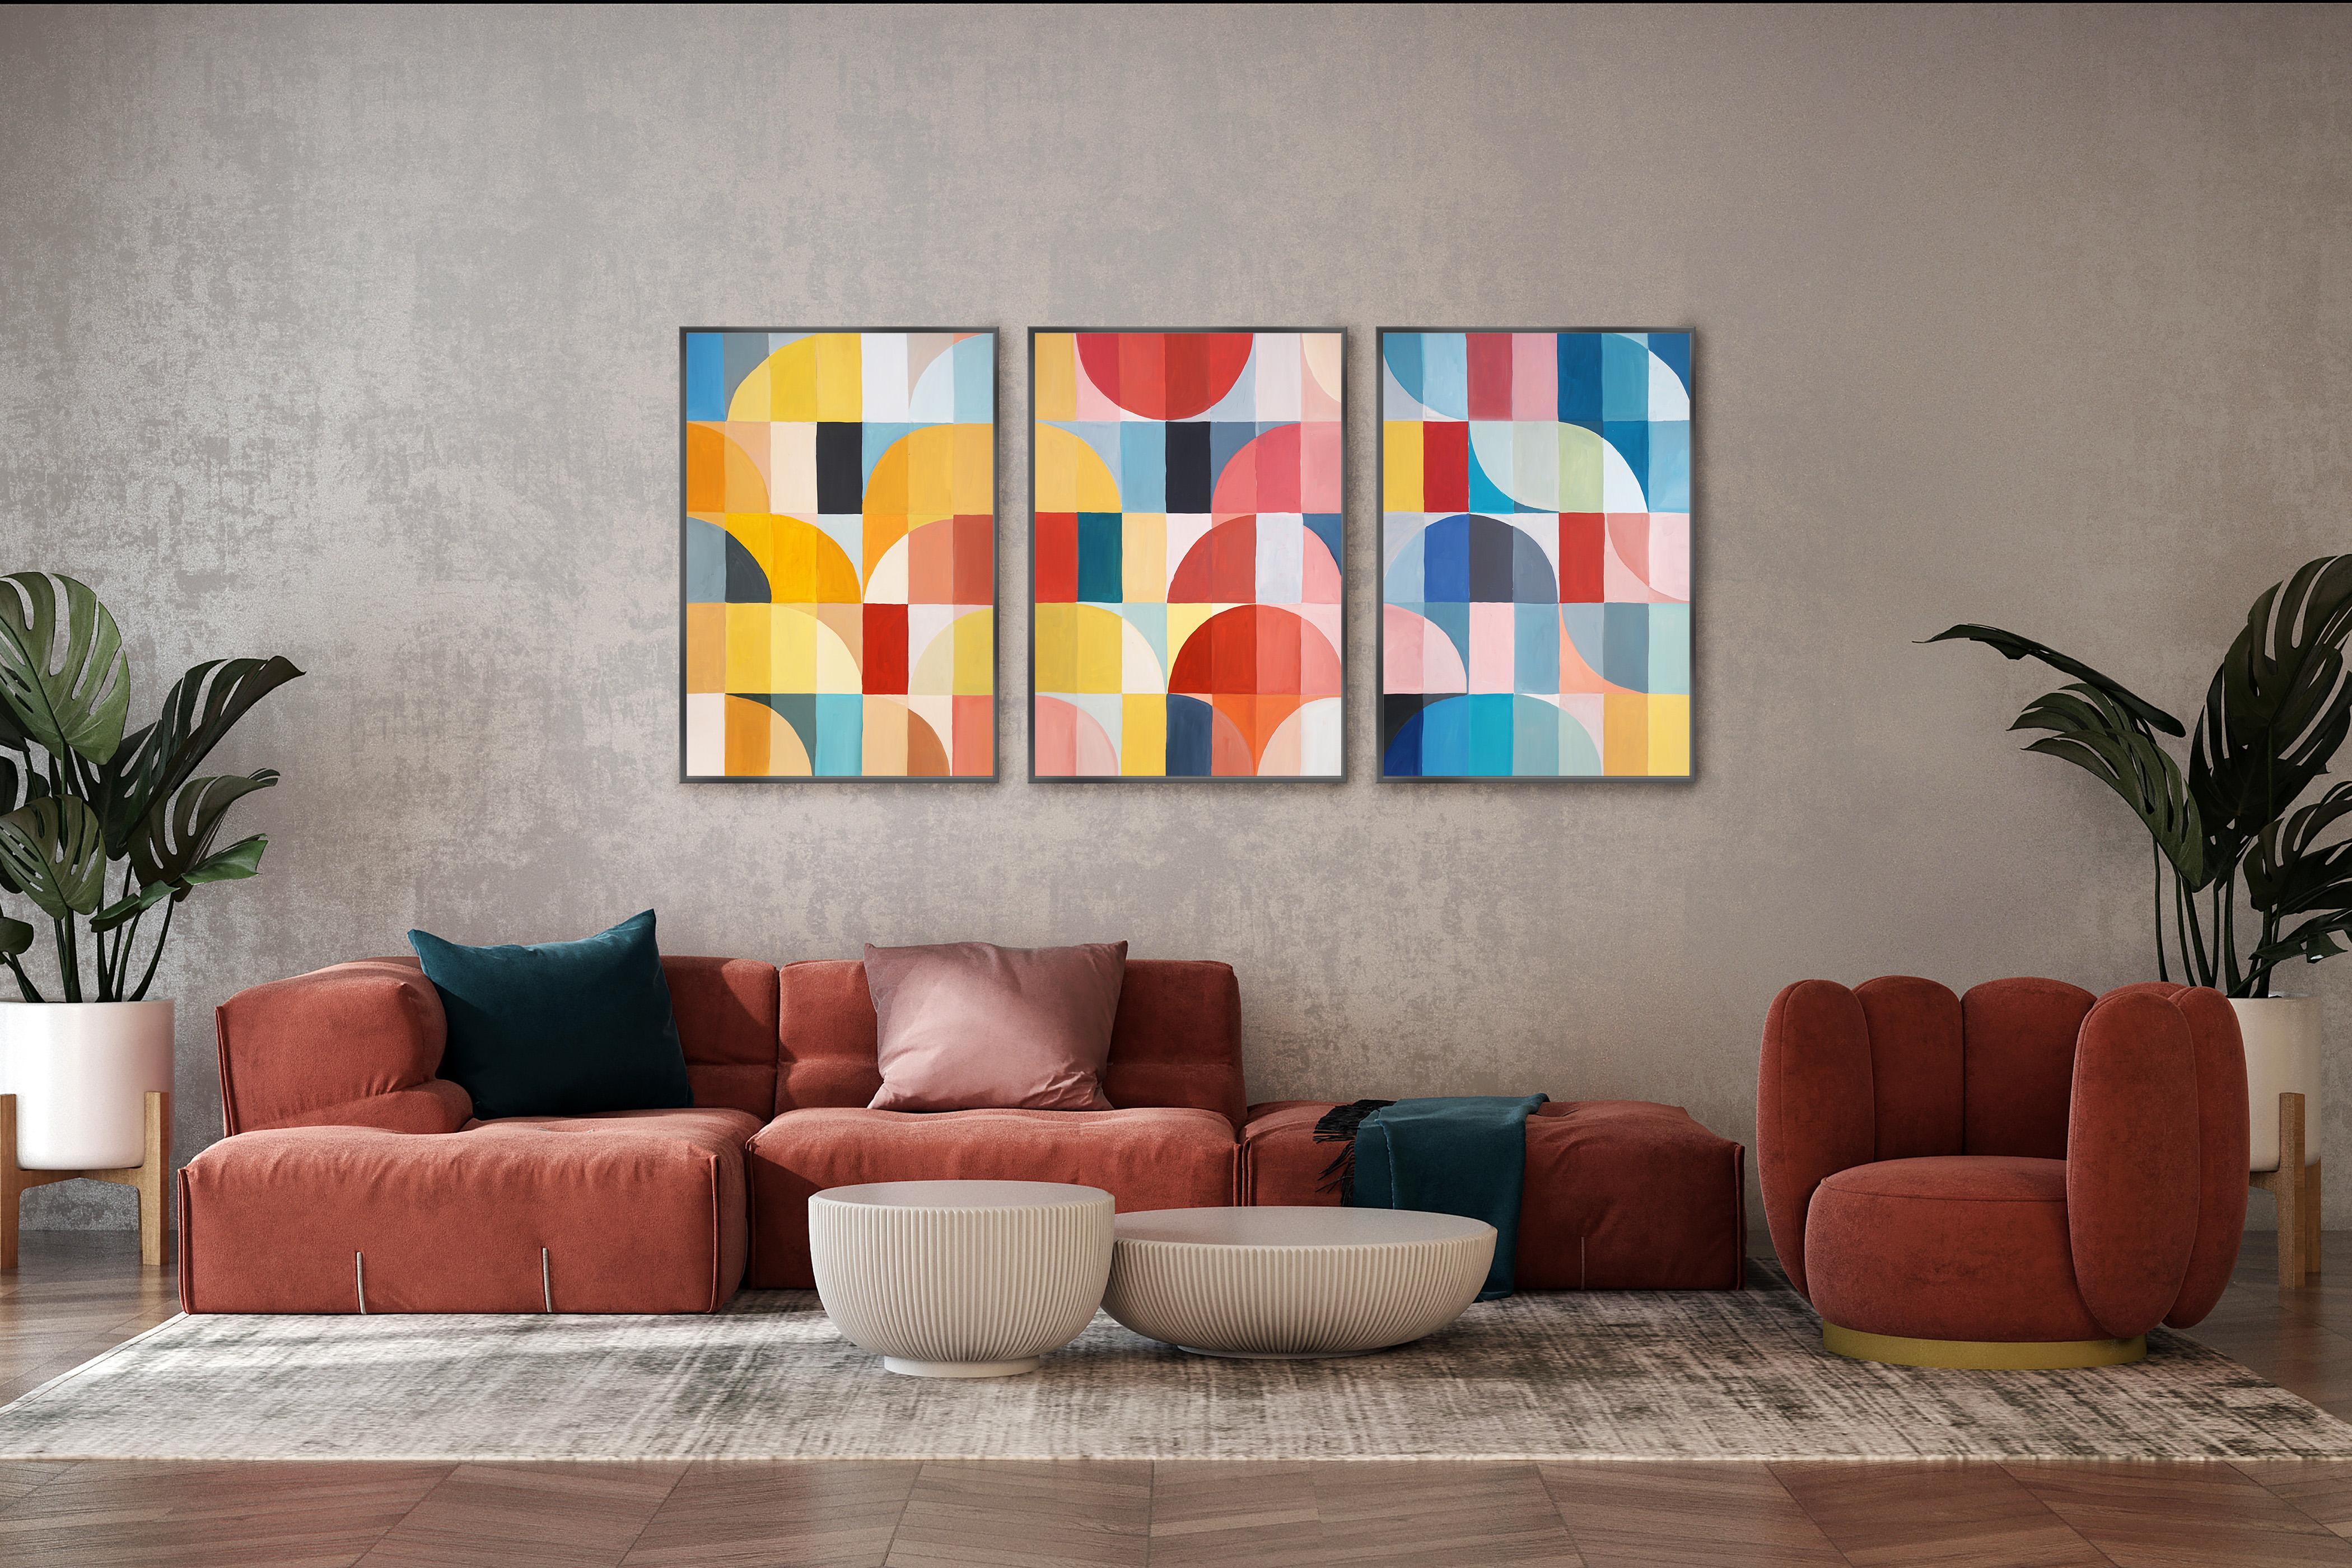 Primary Tones Arcs & Curves, Yellow, Blue and Red Bauhaus Grid, Large Triptych 4